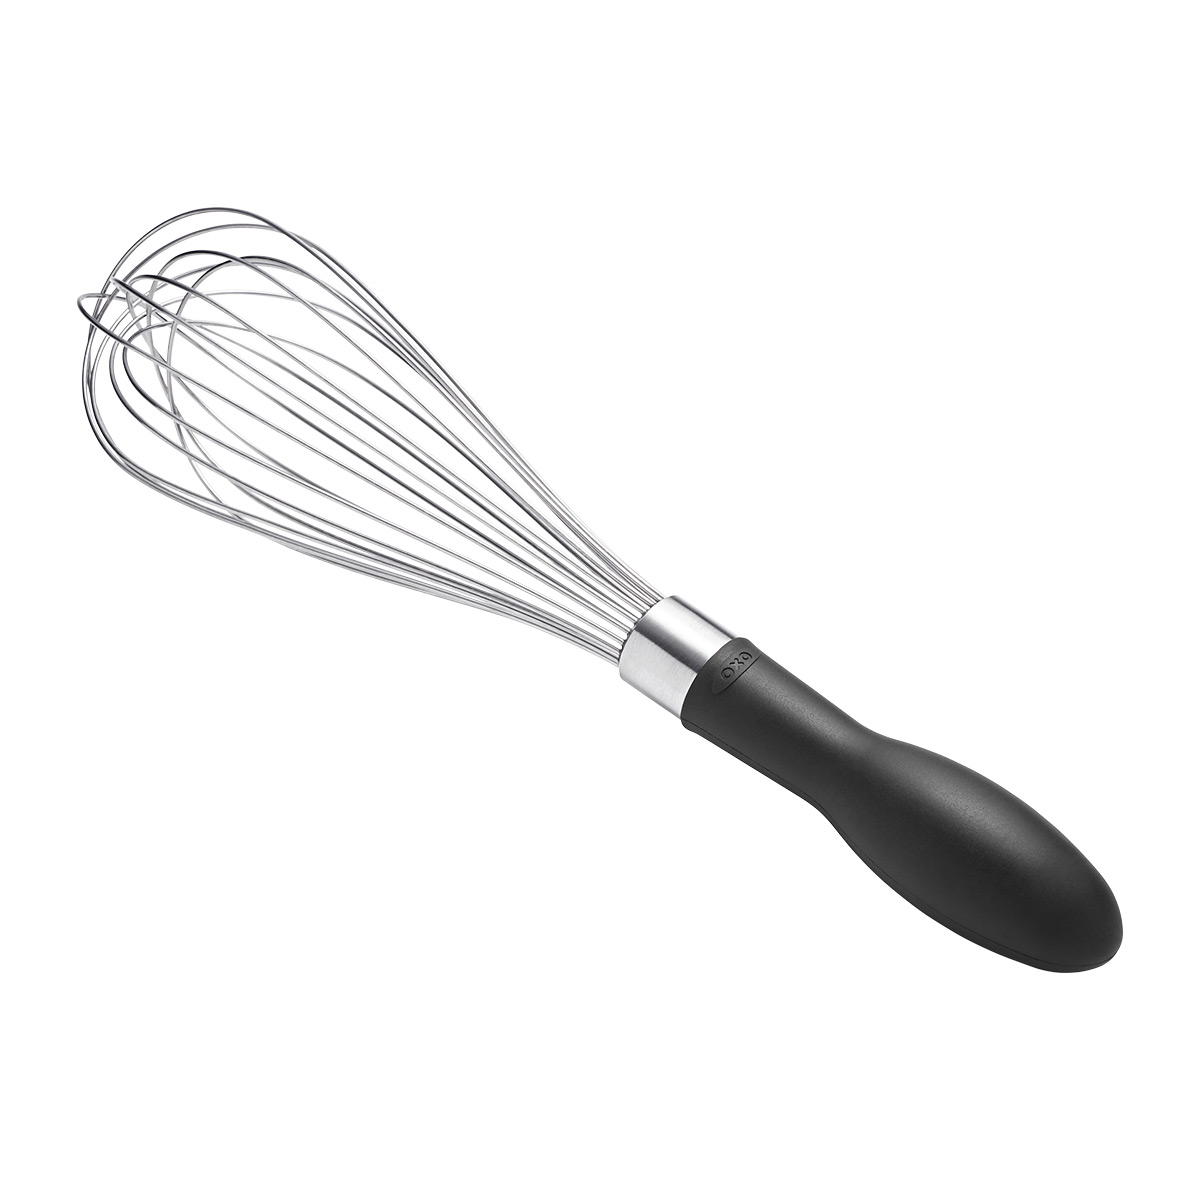 https://www.containerstore.com/catalogimages/490670/10095509-oxo-gg_74291_1a-balloon-whi.jpg